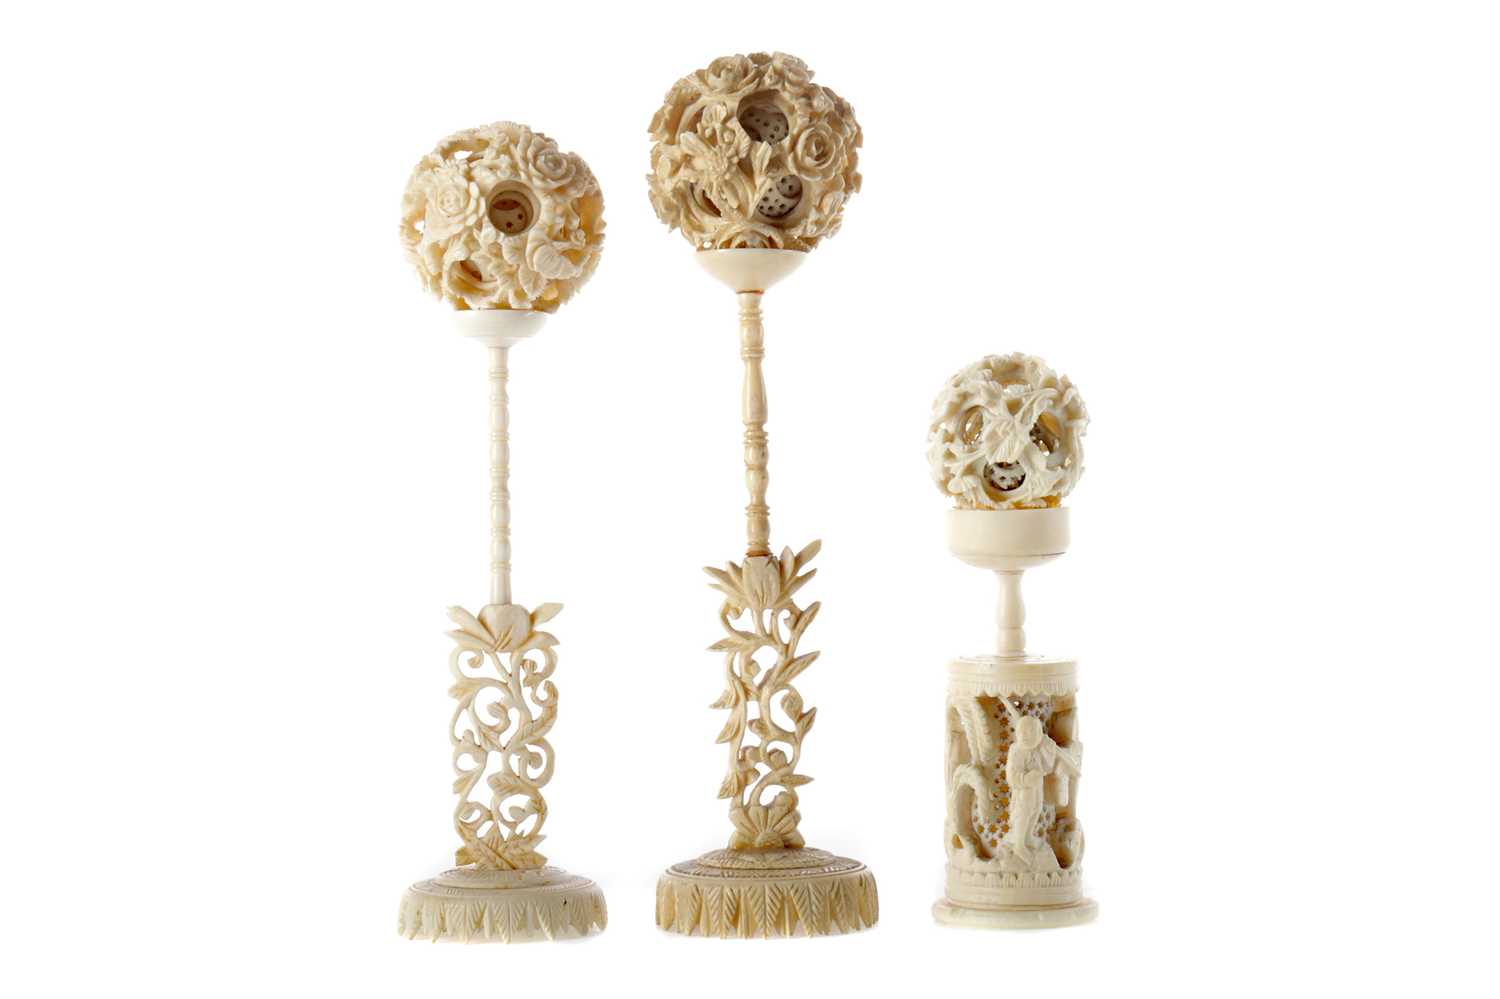 Lot 806 - A LOT OF THREE EARLY 20TH CENTURY CHINESE IVORY CONCENTRIC BALLS WITH STANDS